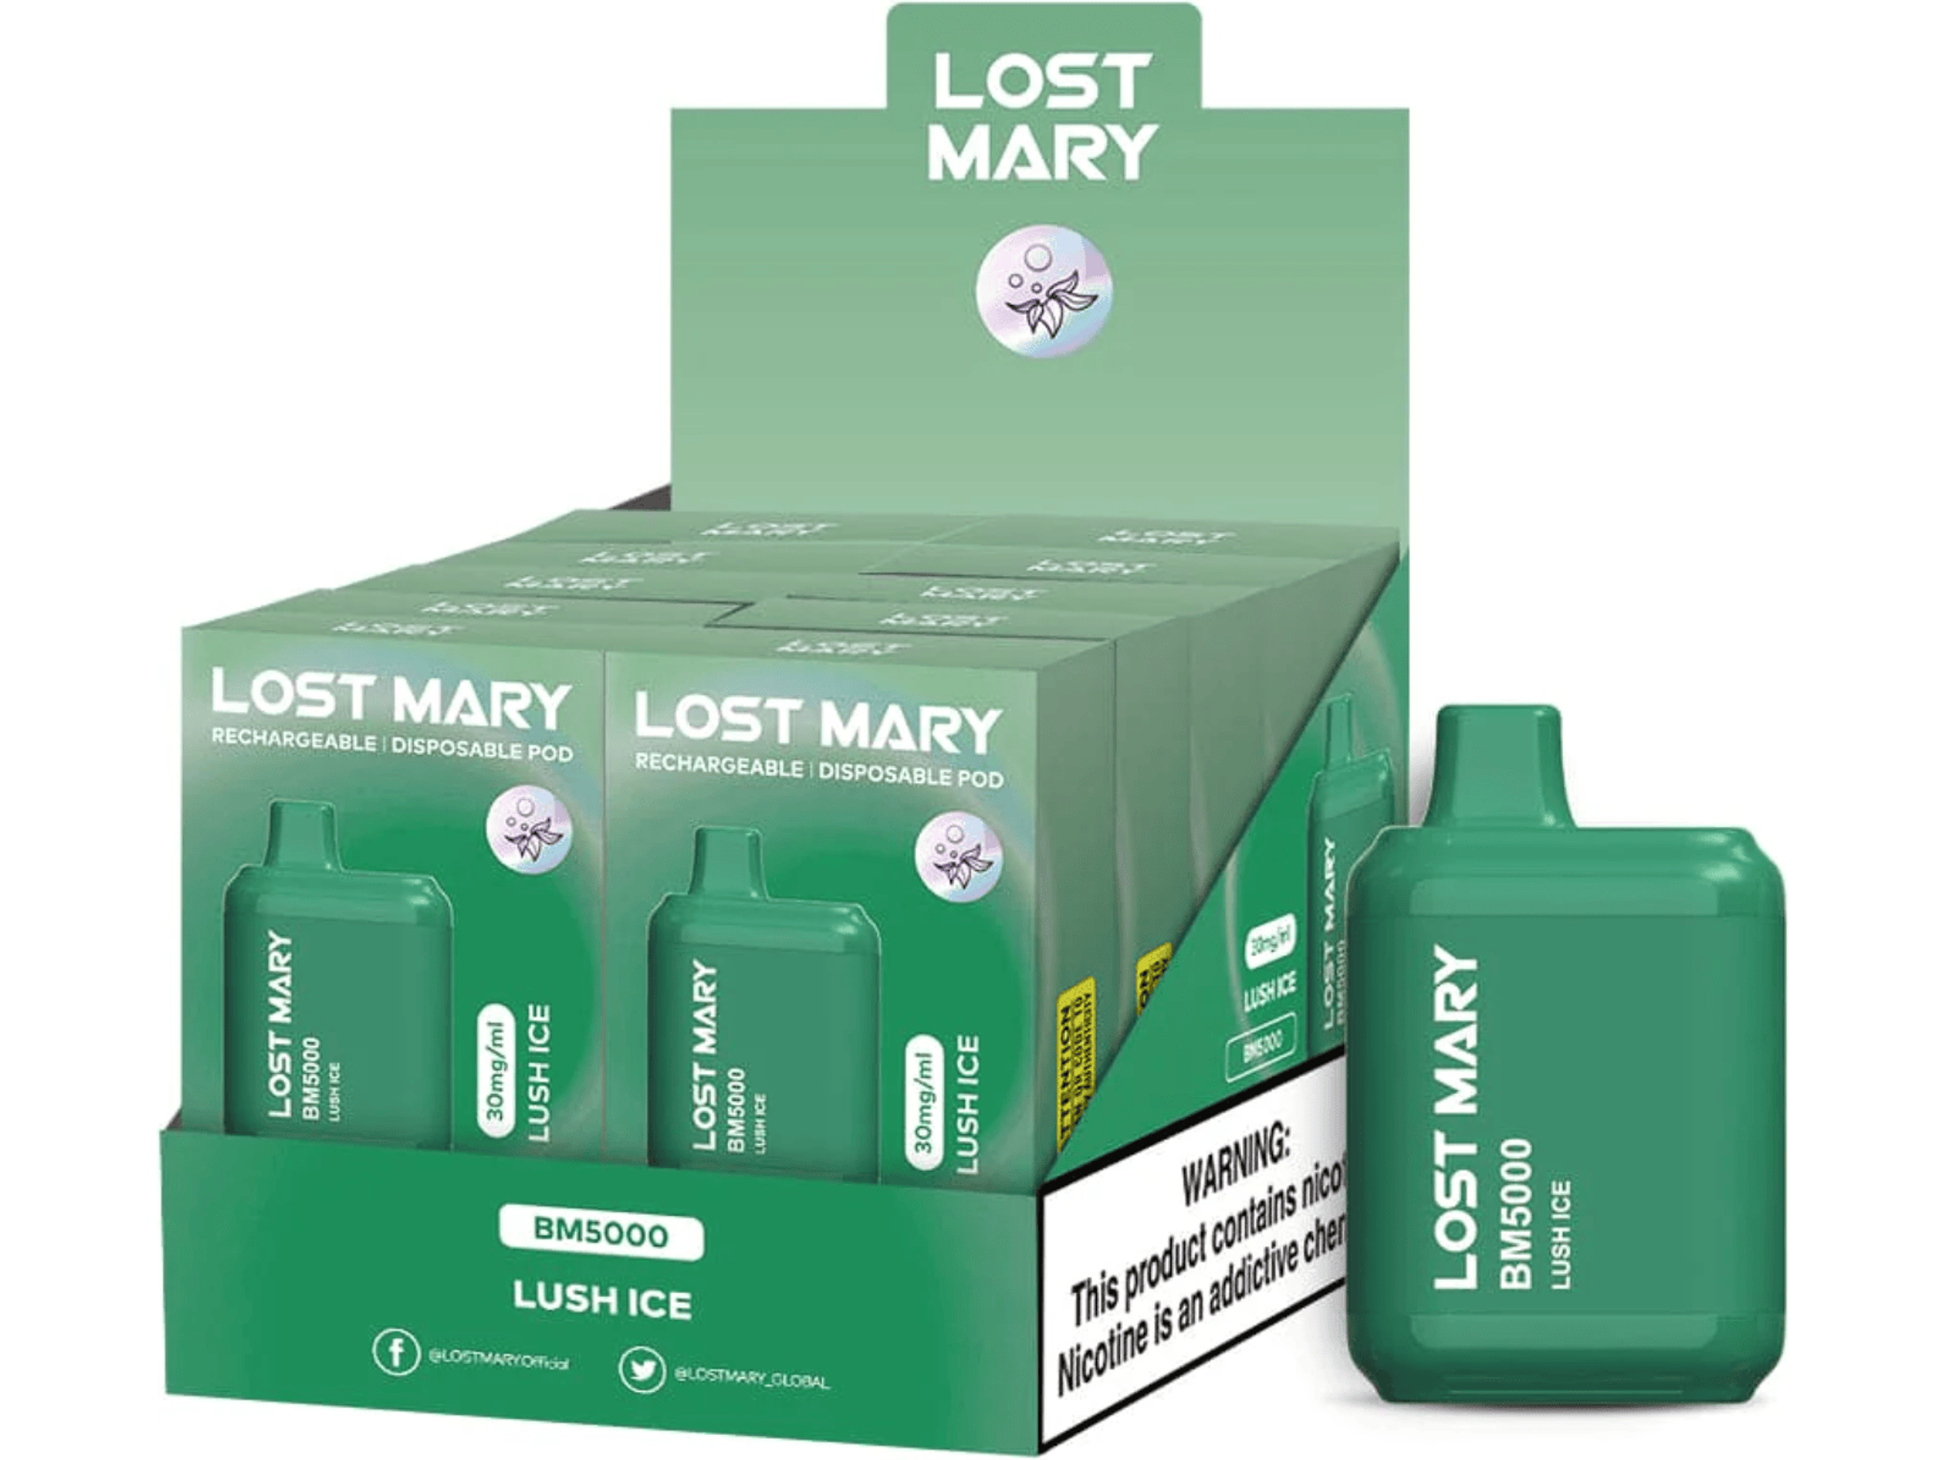 Lost Mary BM5000 Lush Ice flavored disposable vape device and box.